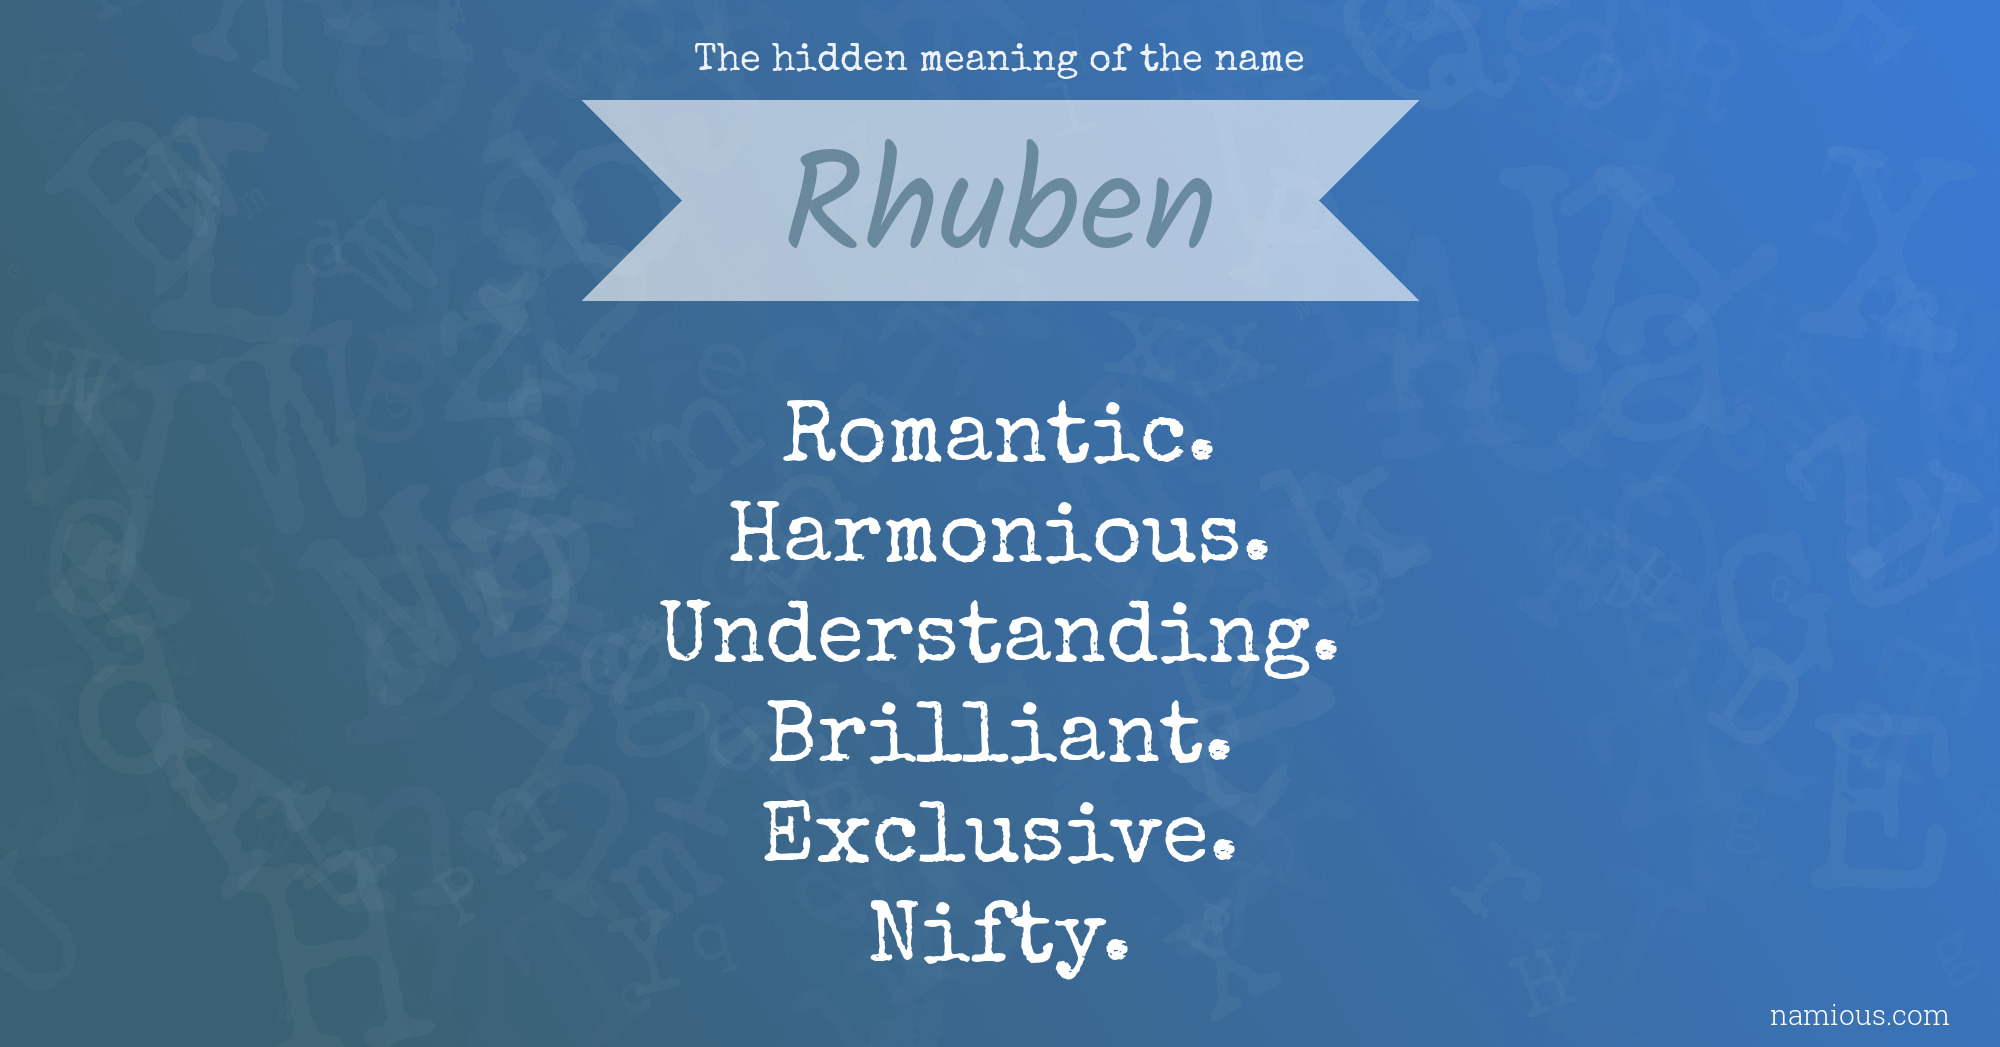 The hidden meaning of the name Rhuben